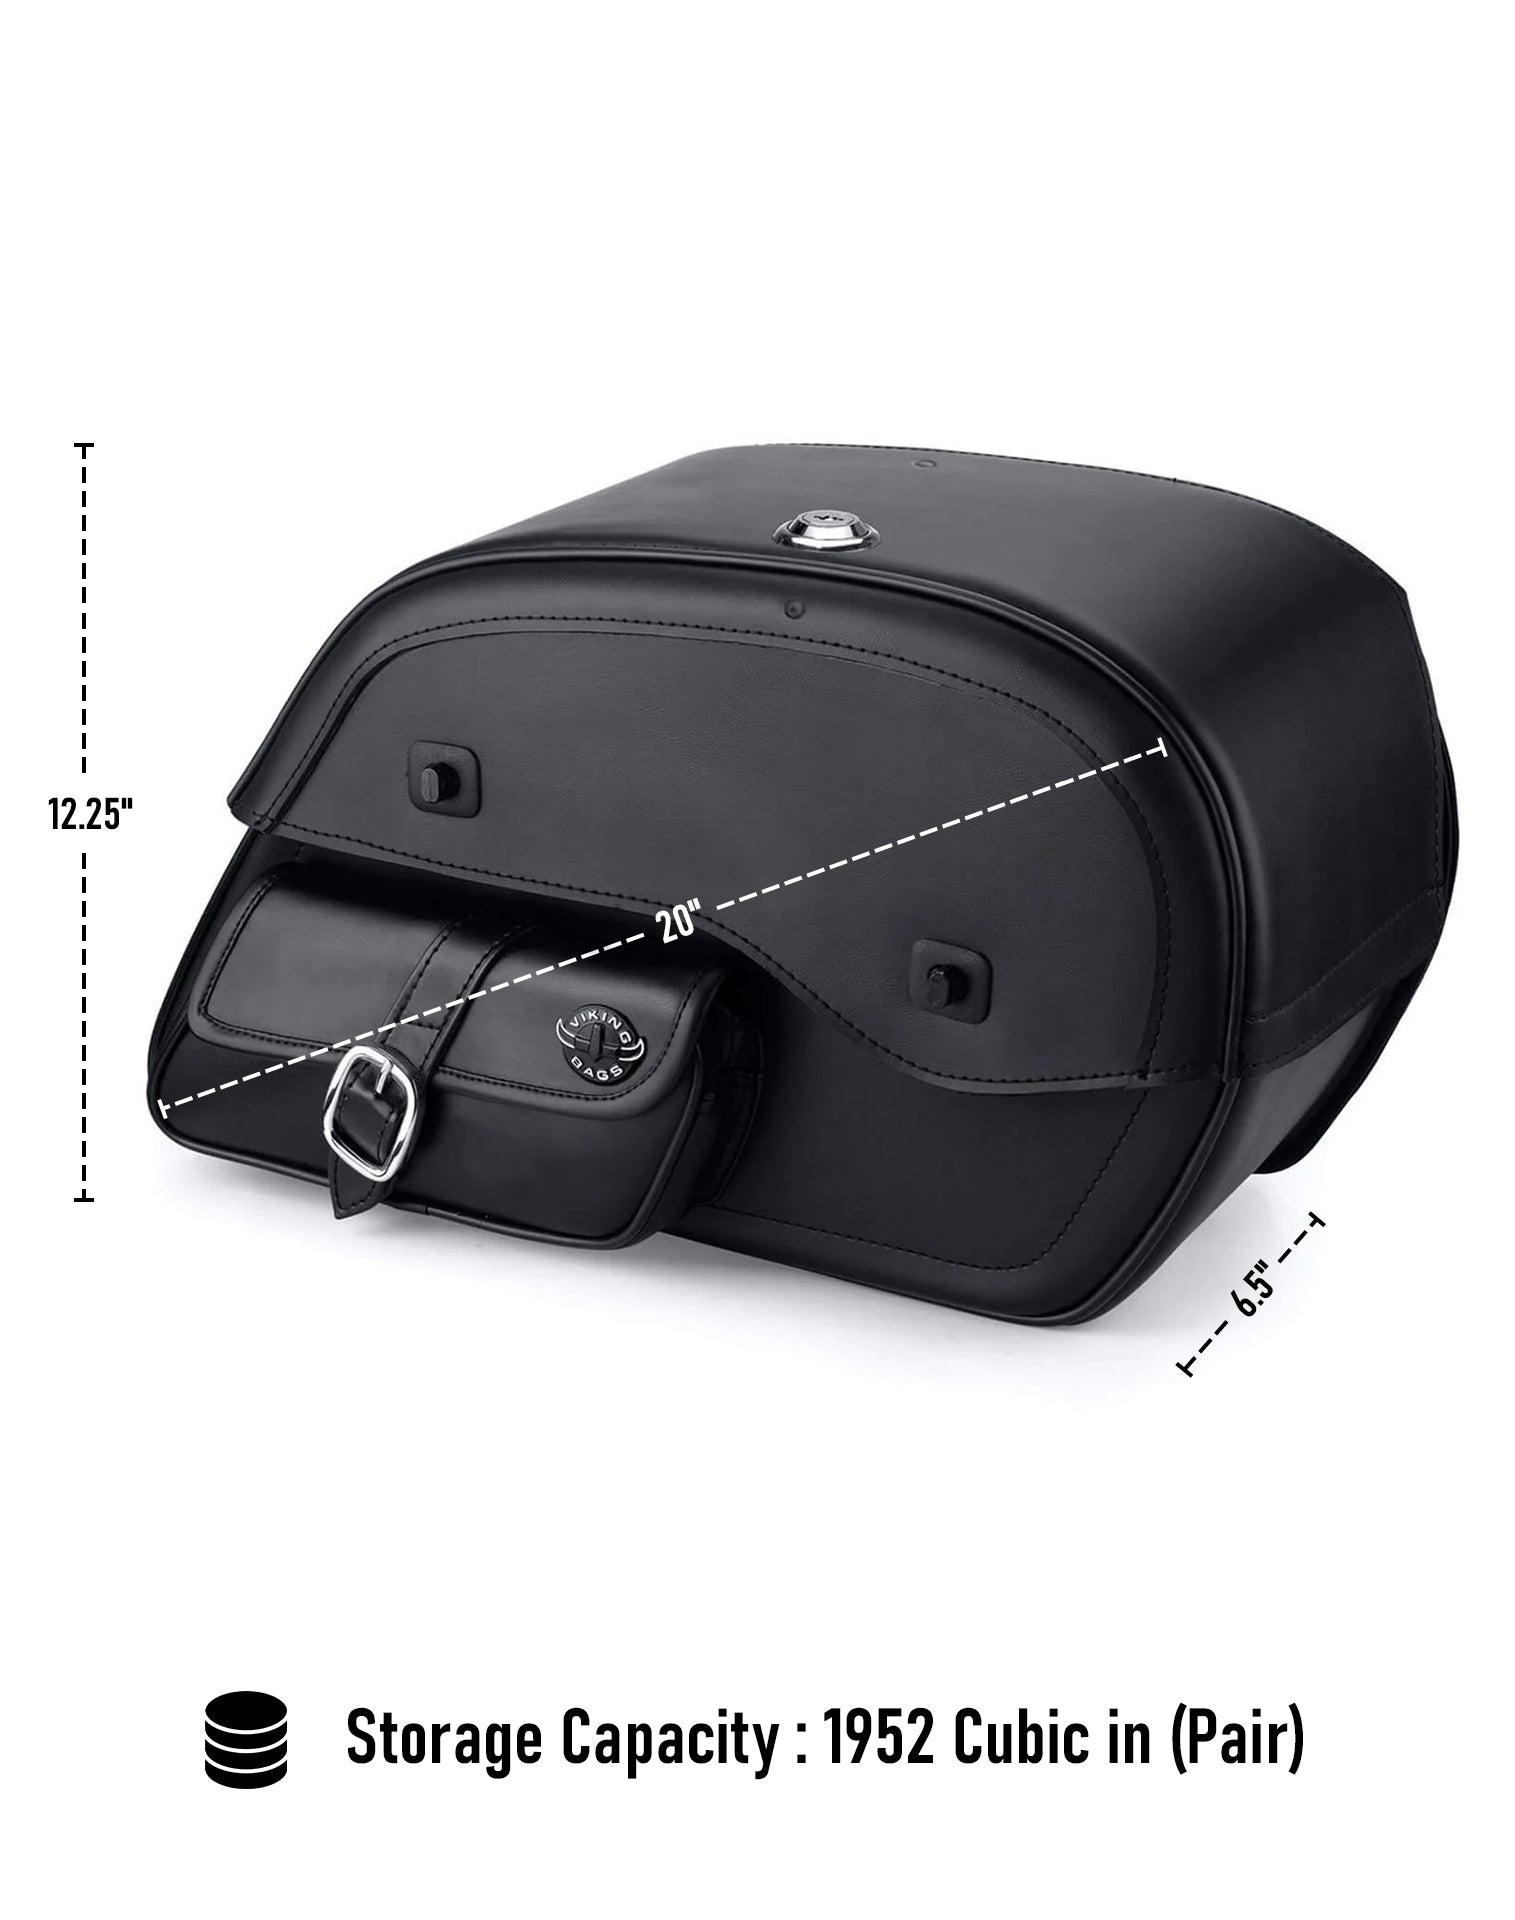 Viking Essential Side Pocket Large Triumph Thunderbird Lt Leather Motorcycle Saddlebags Can Store Your Ridings Gears